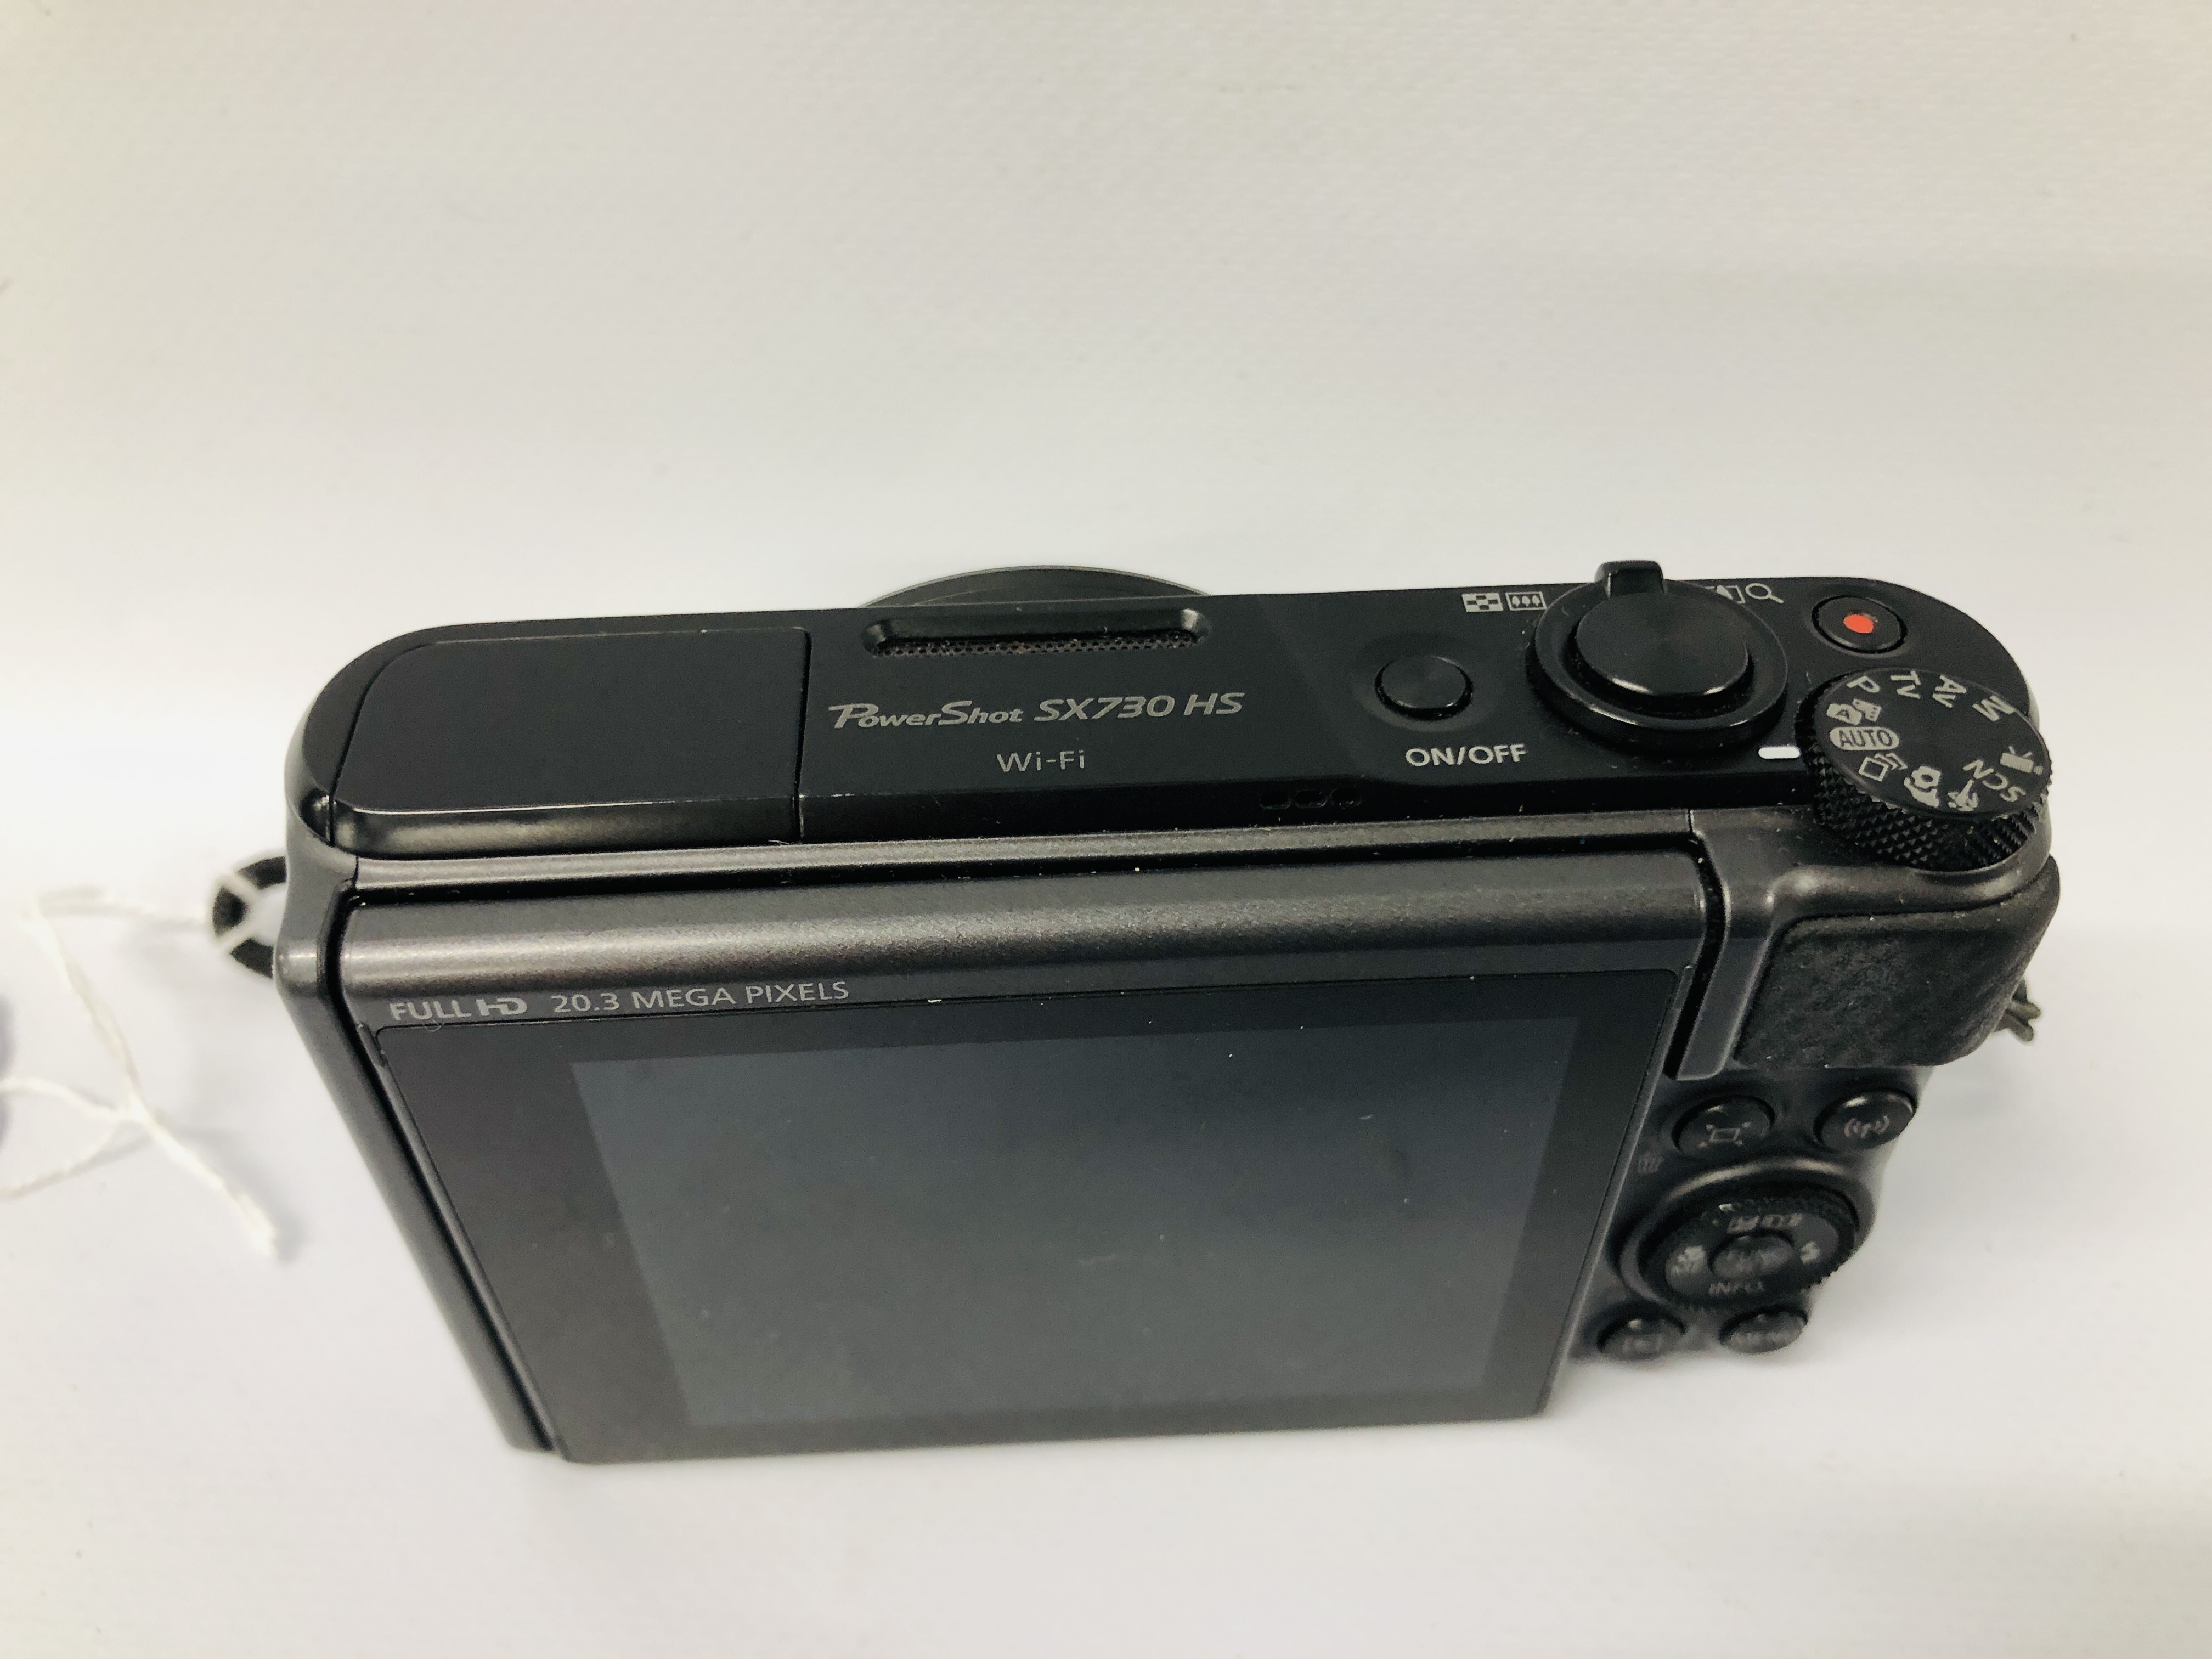 CANON SX730 HS DIGITAL CAMERA S/N 722063000816 - SOLD AS SEEN. - Image 4 of 6